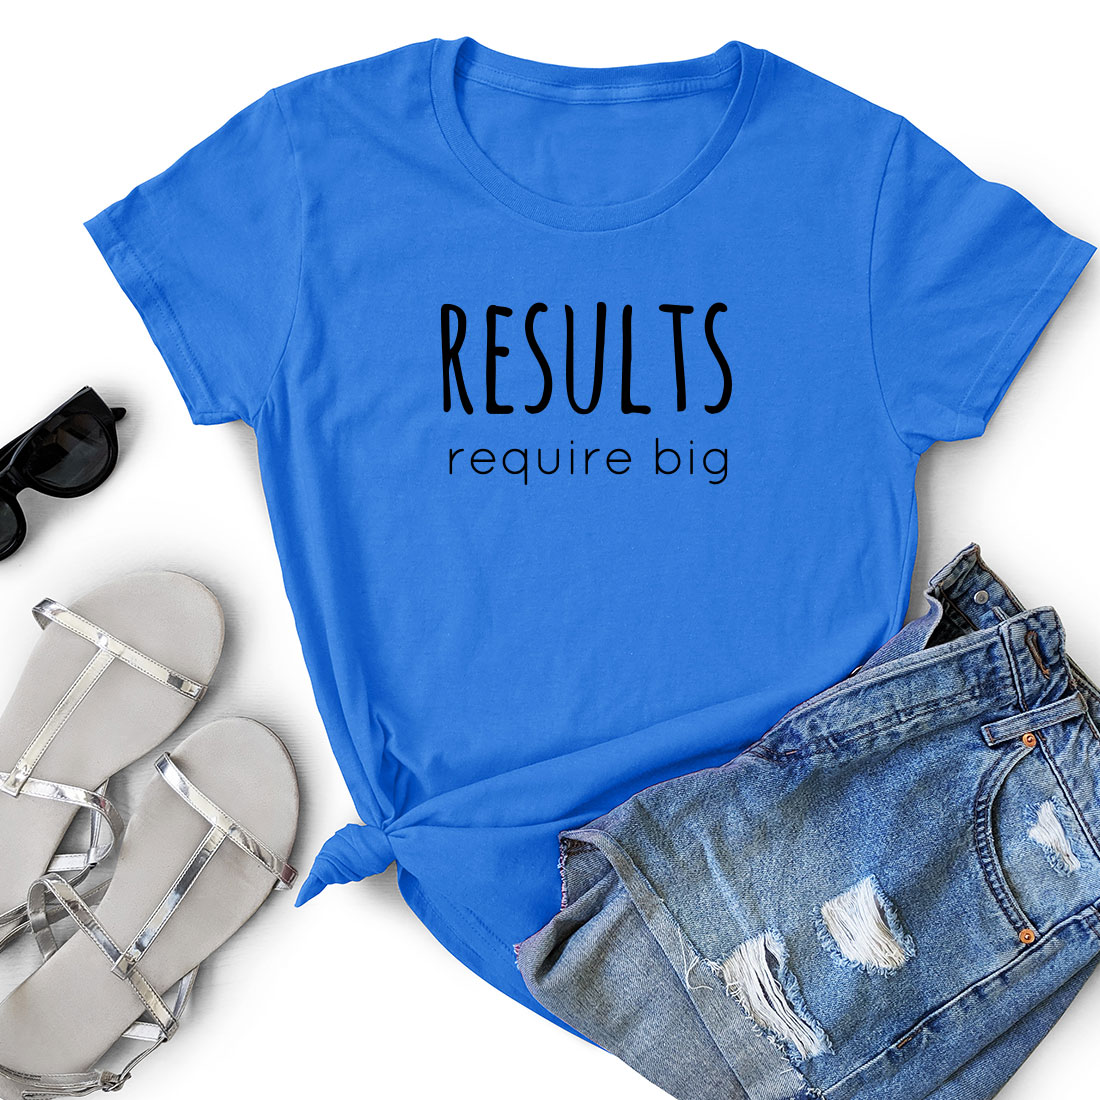 T - shirt that says results requires big.